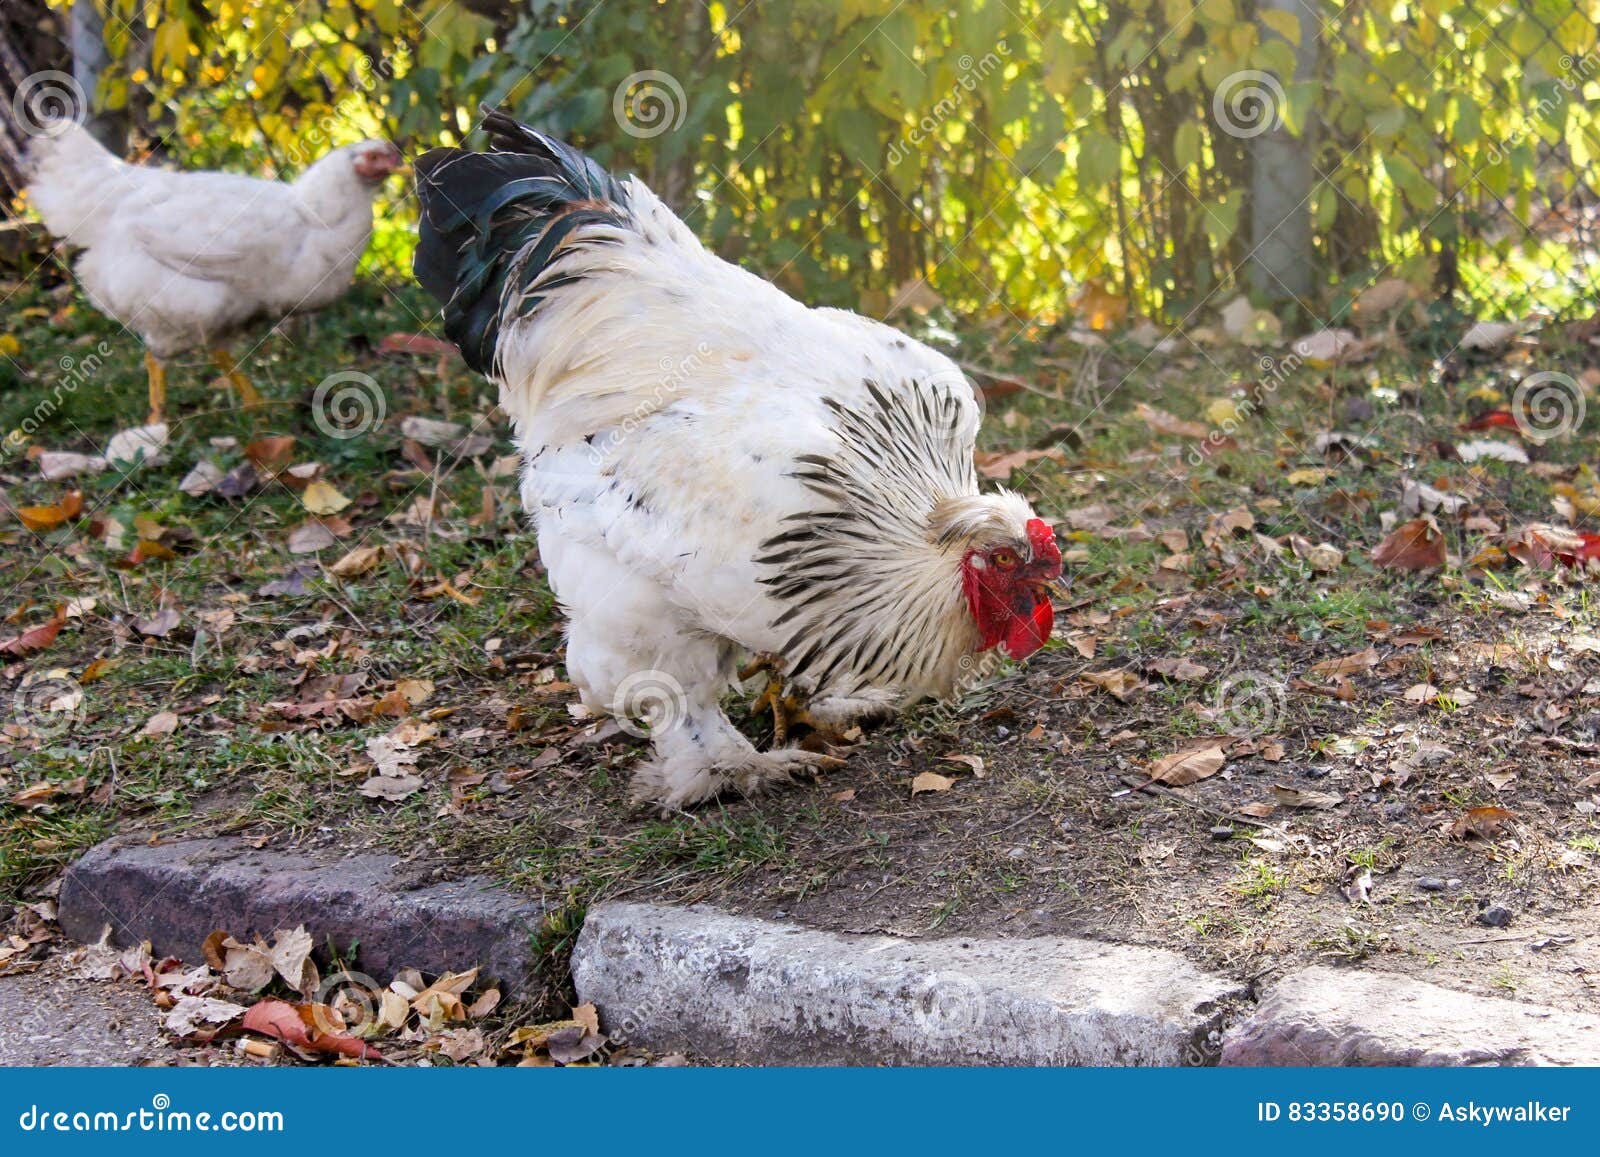 2,161 Brahma Chickens Royalty-Free Images, Stock Photos & Pictures